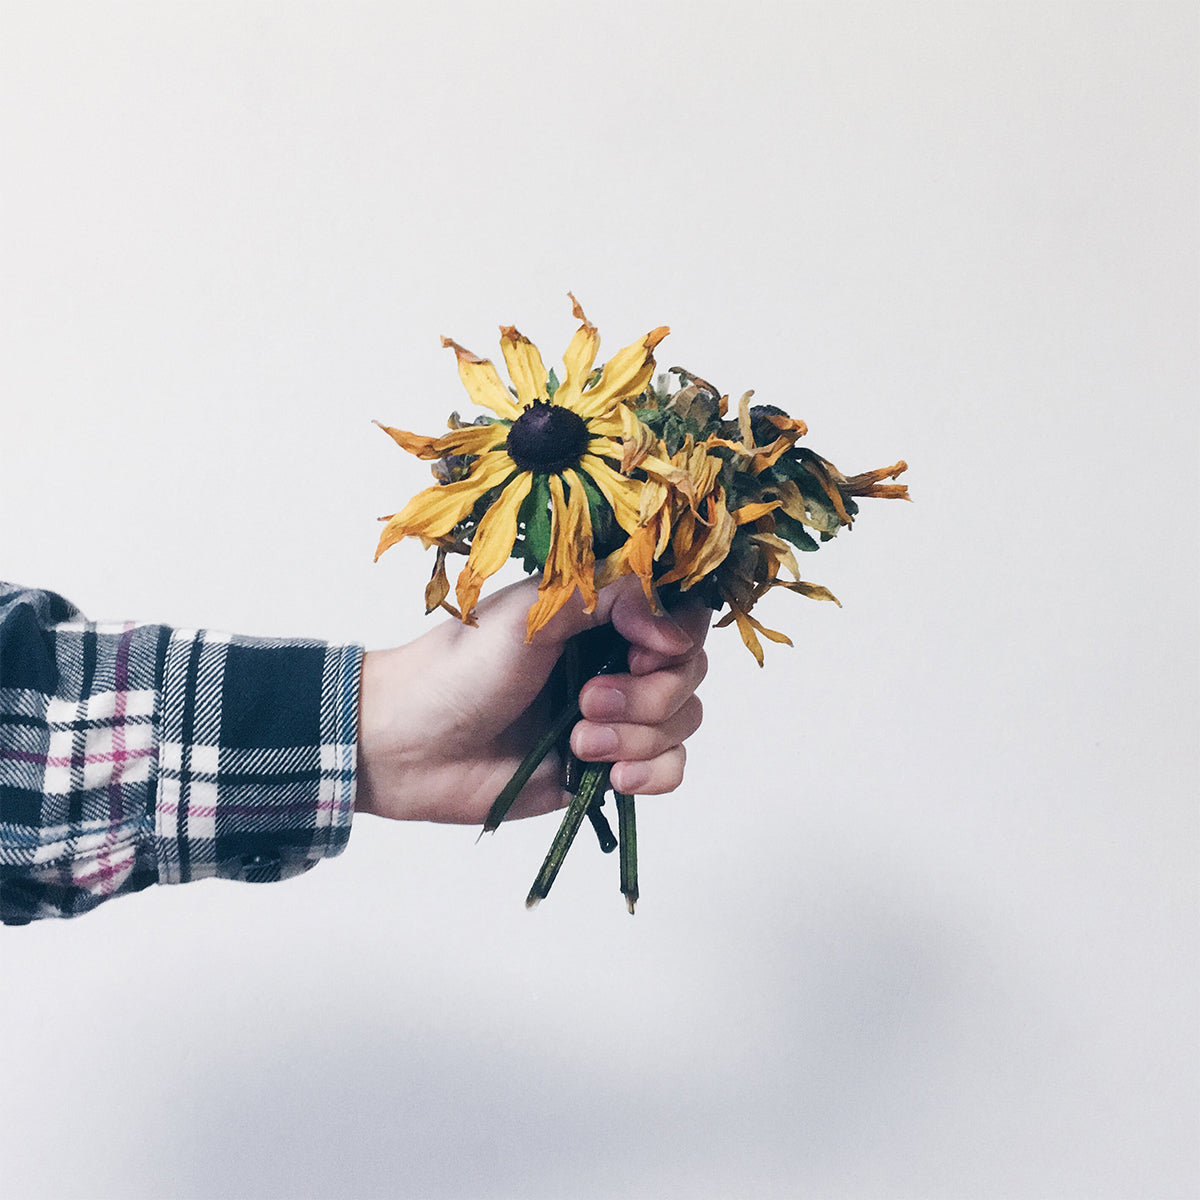 person holding wilted sun flowers with one hand 